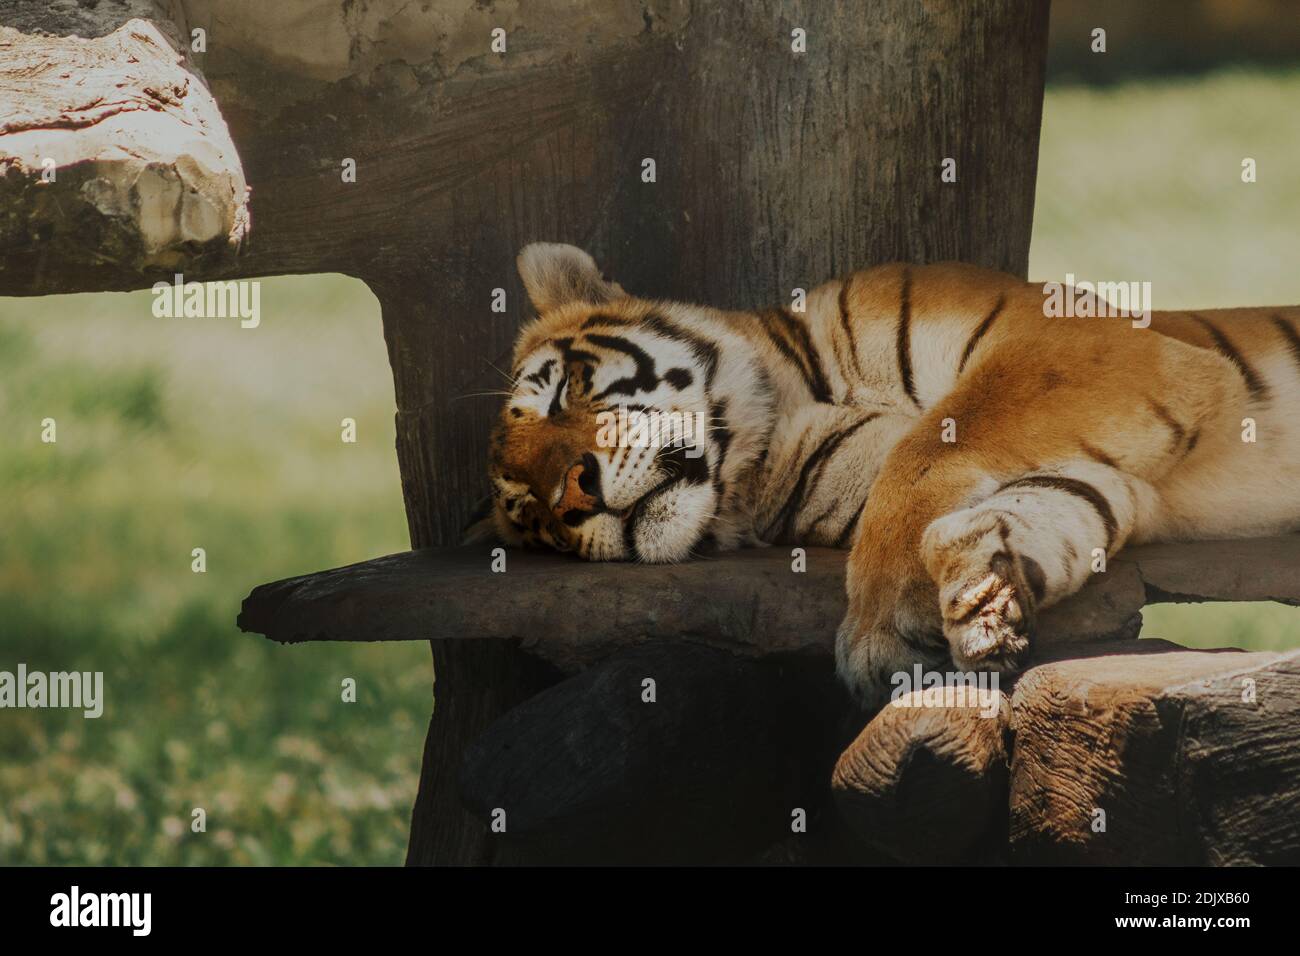 A beautiful portrait of a cute large tiger sleeping on a rock piece under a tree shadow Stock Photo